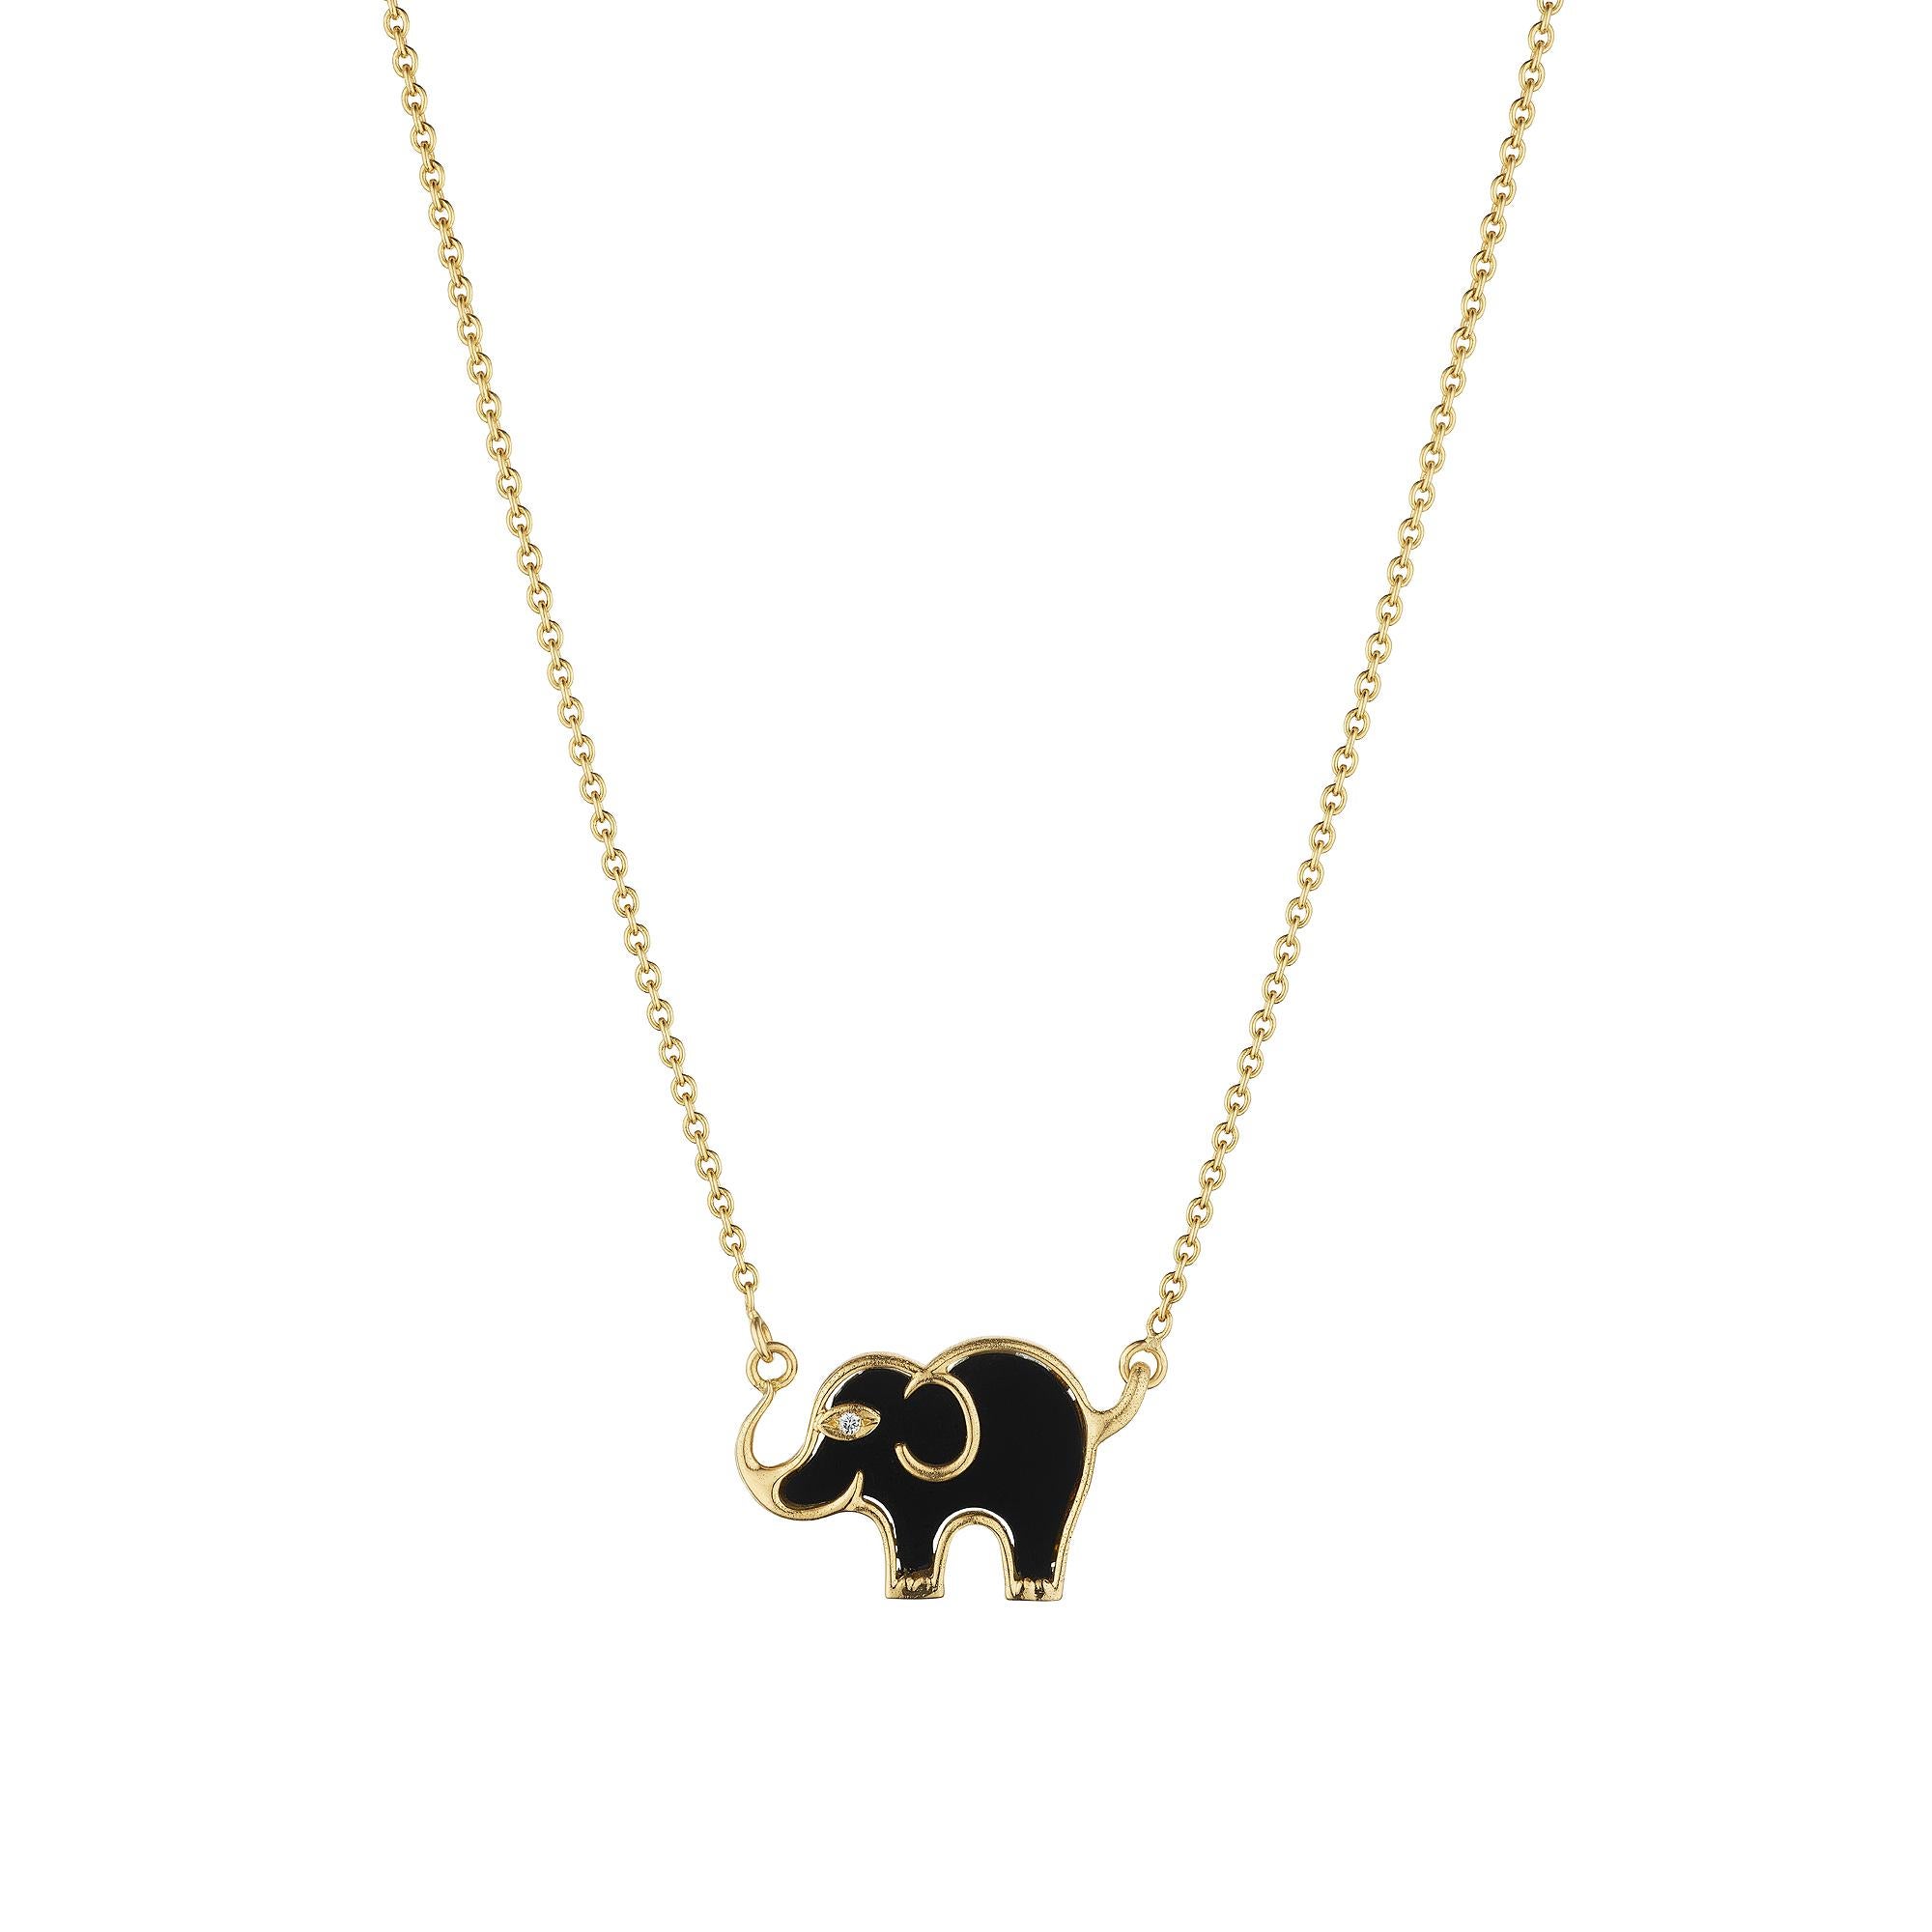 With its trunk up for luck, this Van Cleef & Arpels onyx, diamond, and 18 karat yellow gold modernist elephant pendant has you covered.  Circa 2000.  Signed VCA.  Serial number 74750.  Elephant is 1